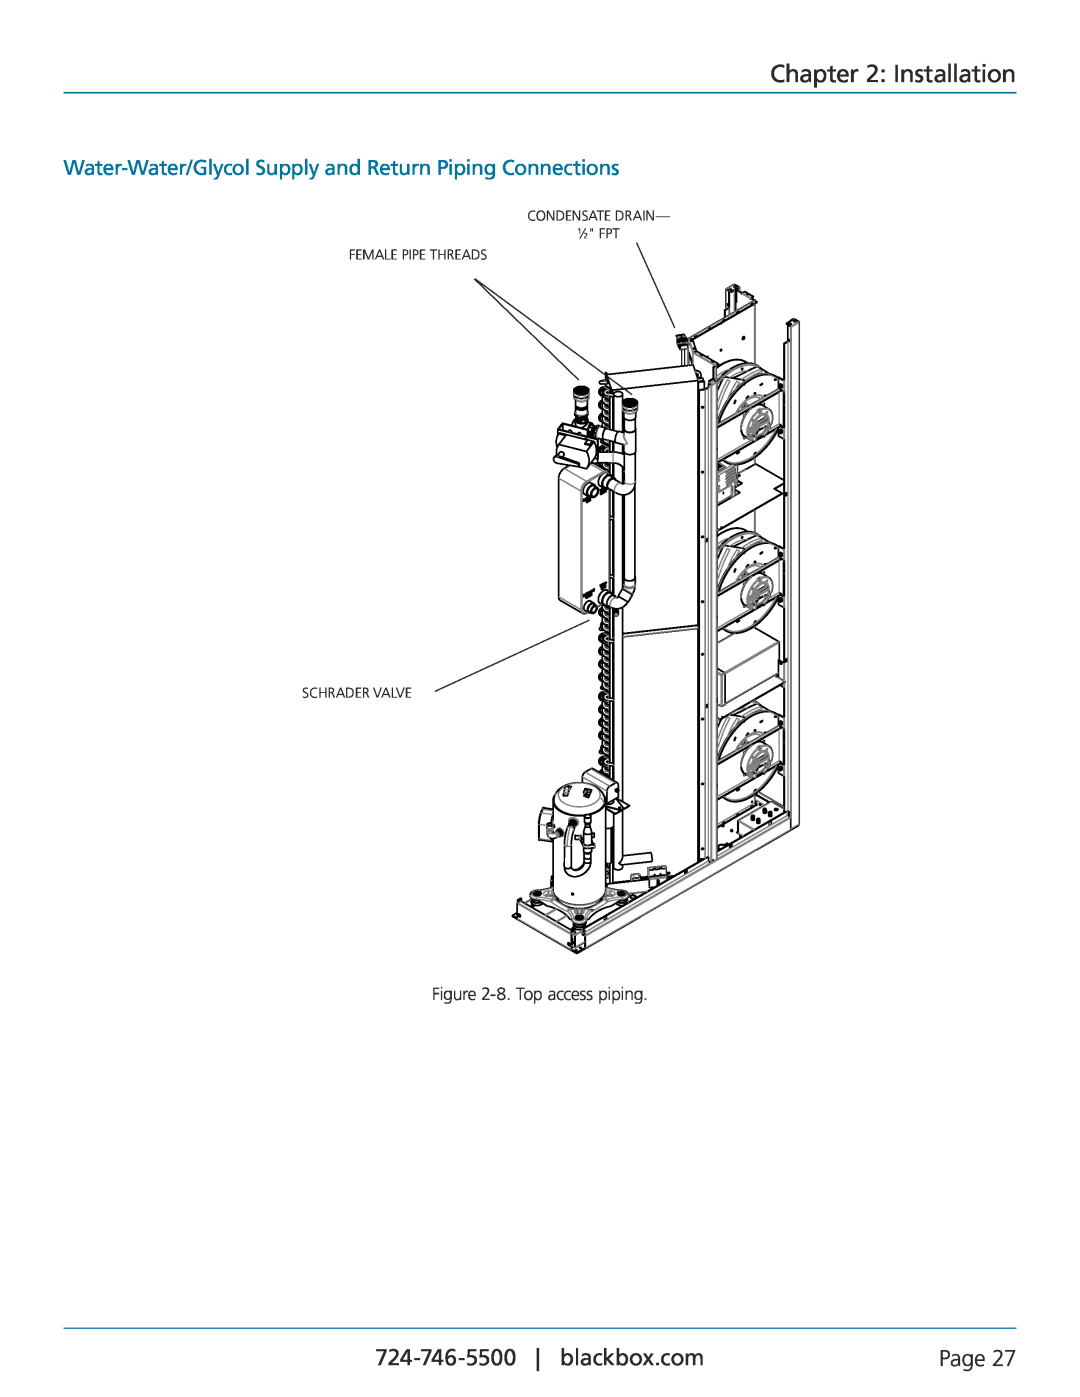 Black Box Black Box Cold Row DX user manual Water-Water/Glycol Supply and Return Piping Connections, Installation, Page 